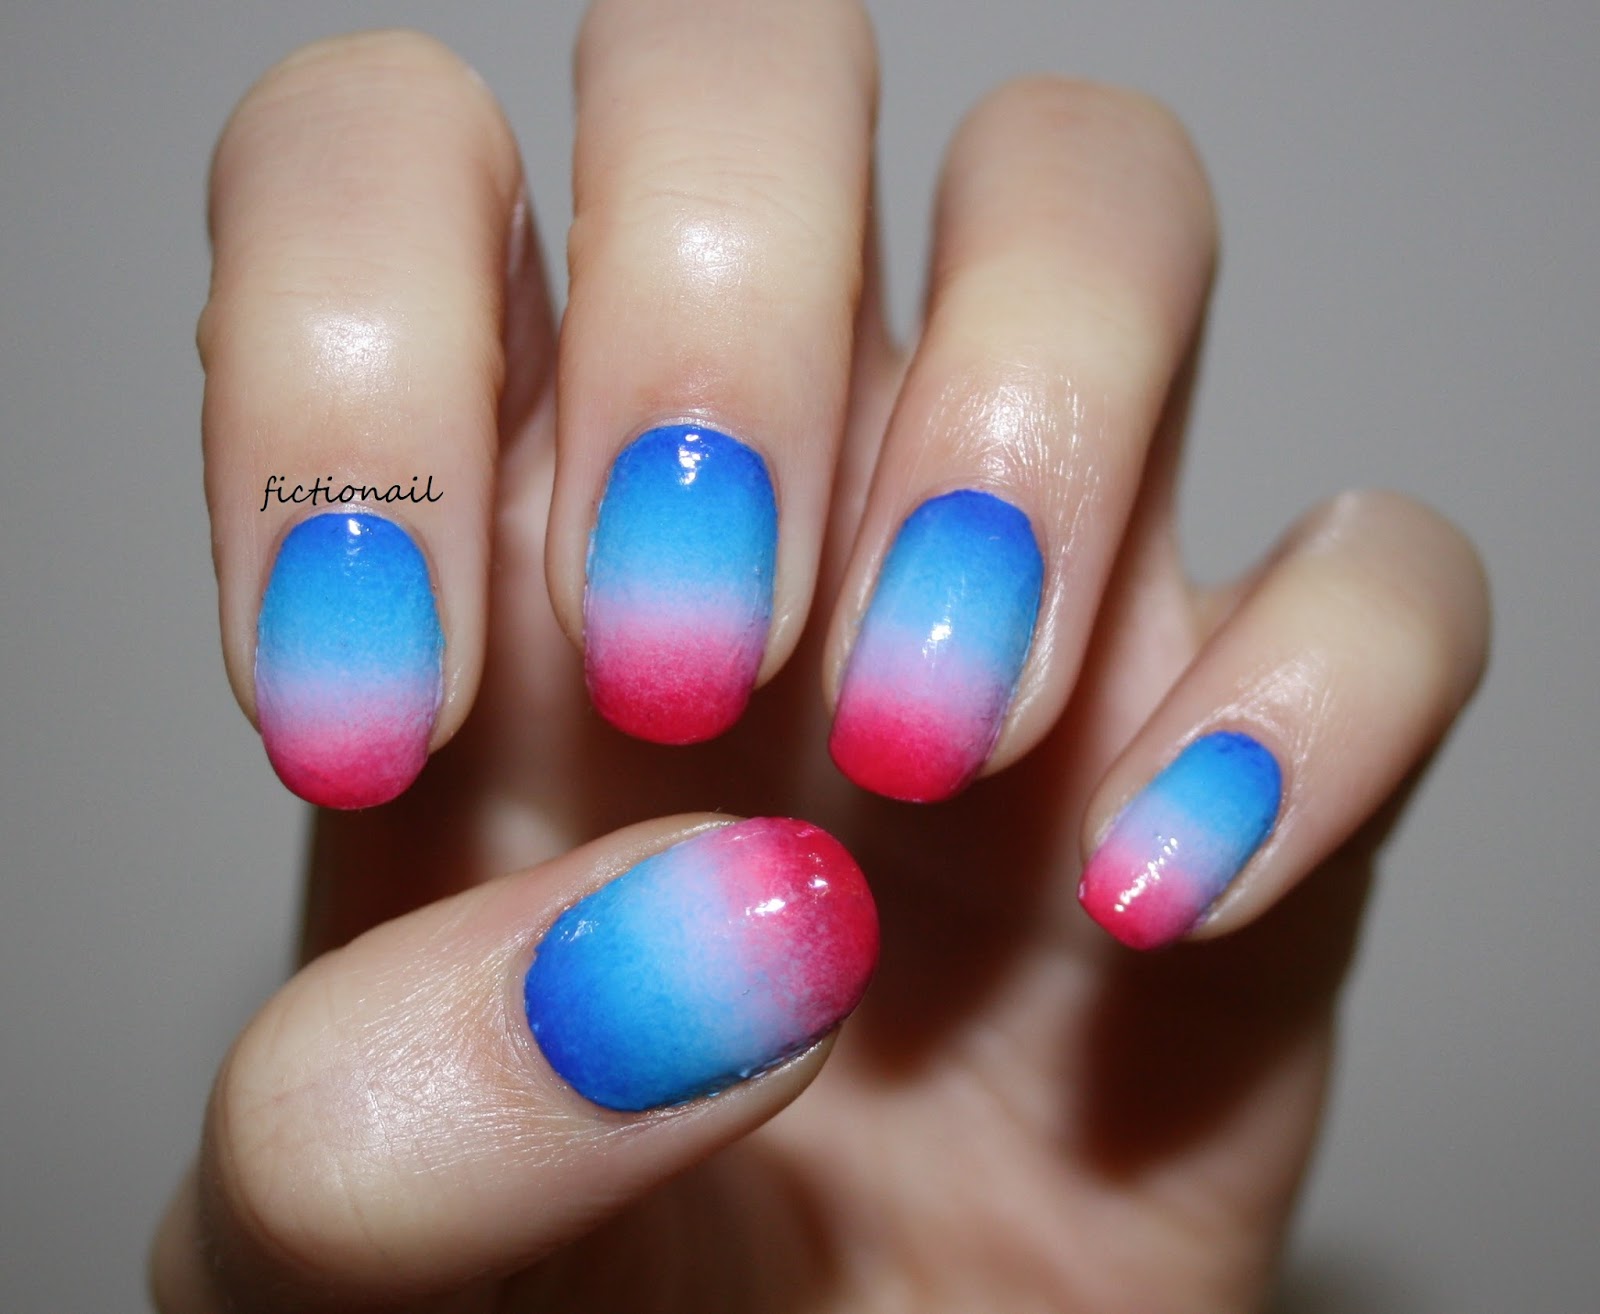 6. "Pastel Gradient Nails for Homecoming" - wide 3